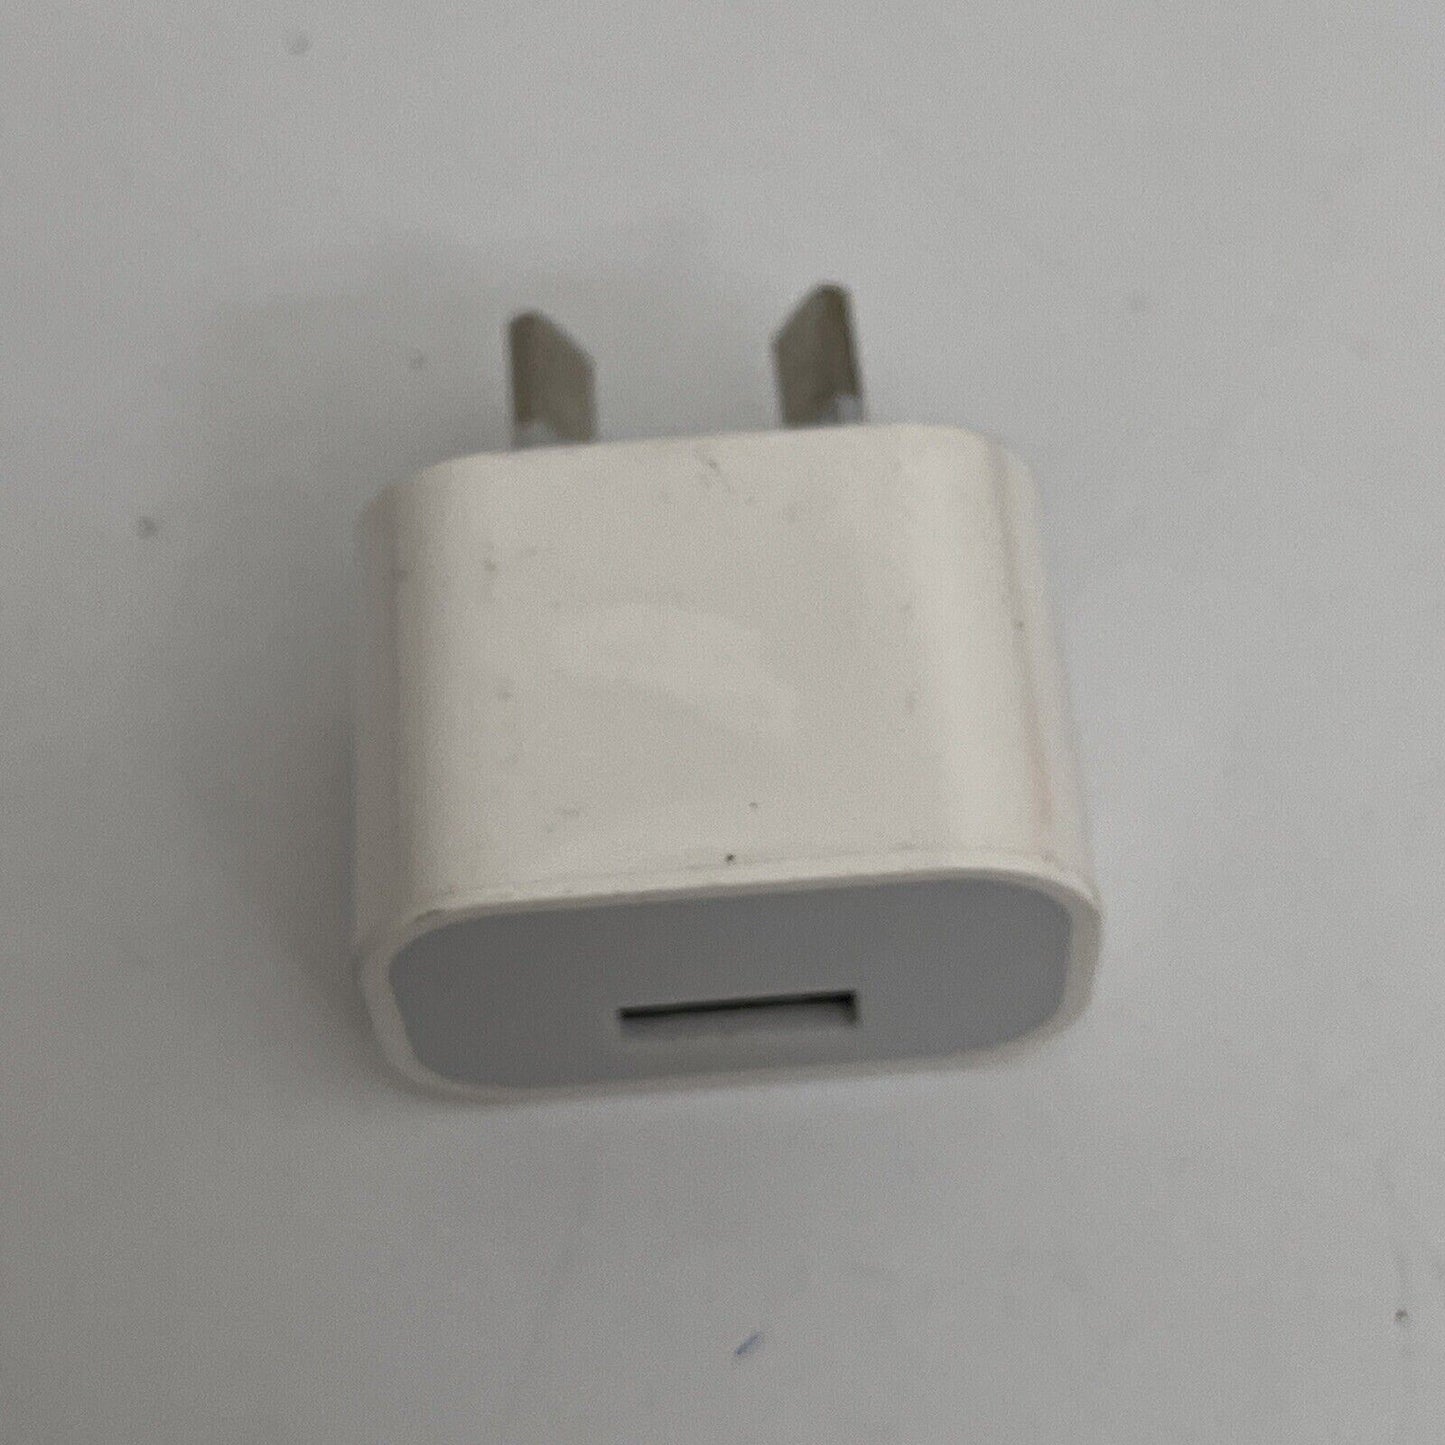 Genuine Apple A1444 USB Charger for Apple iPhone iPod iPad